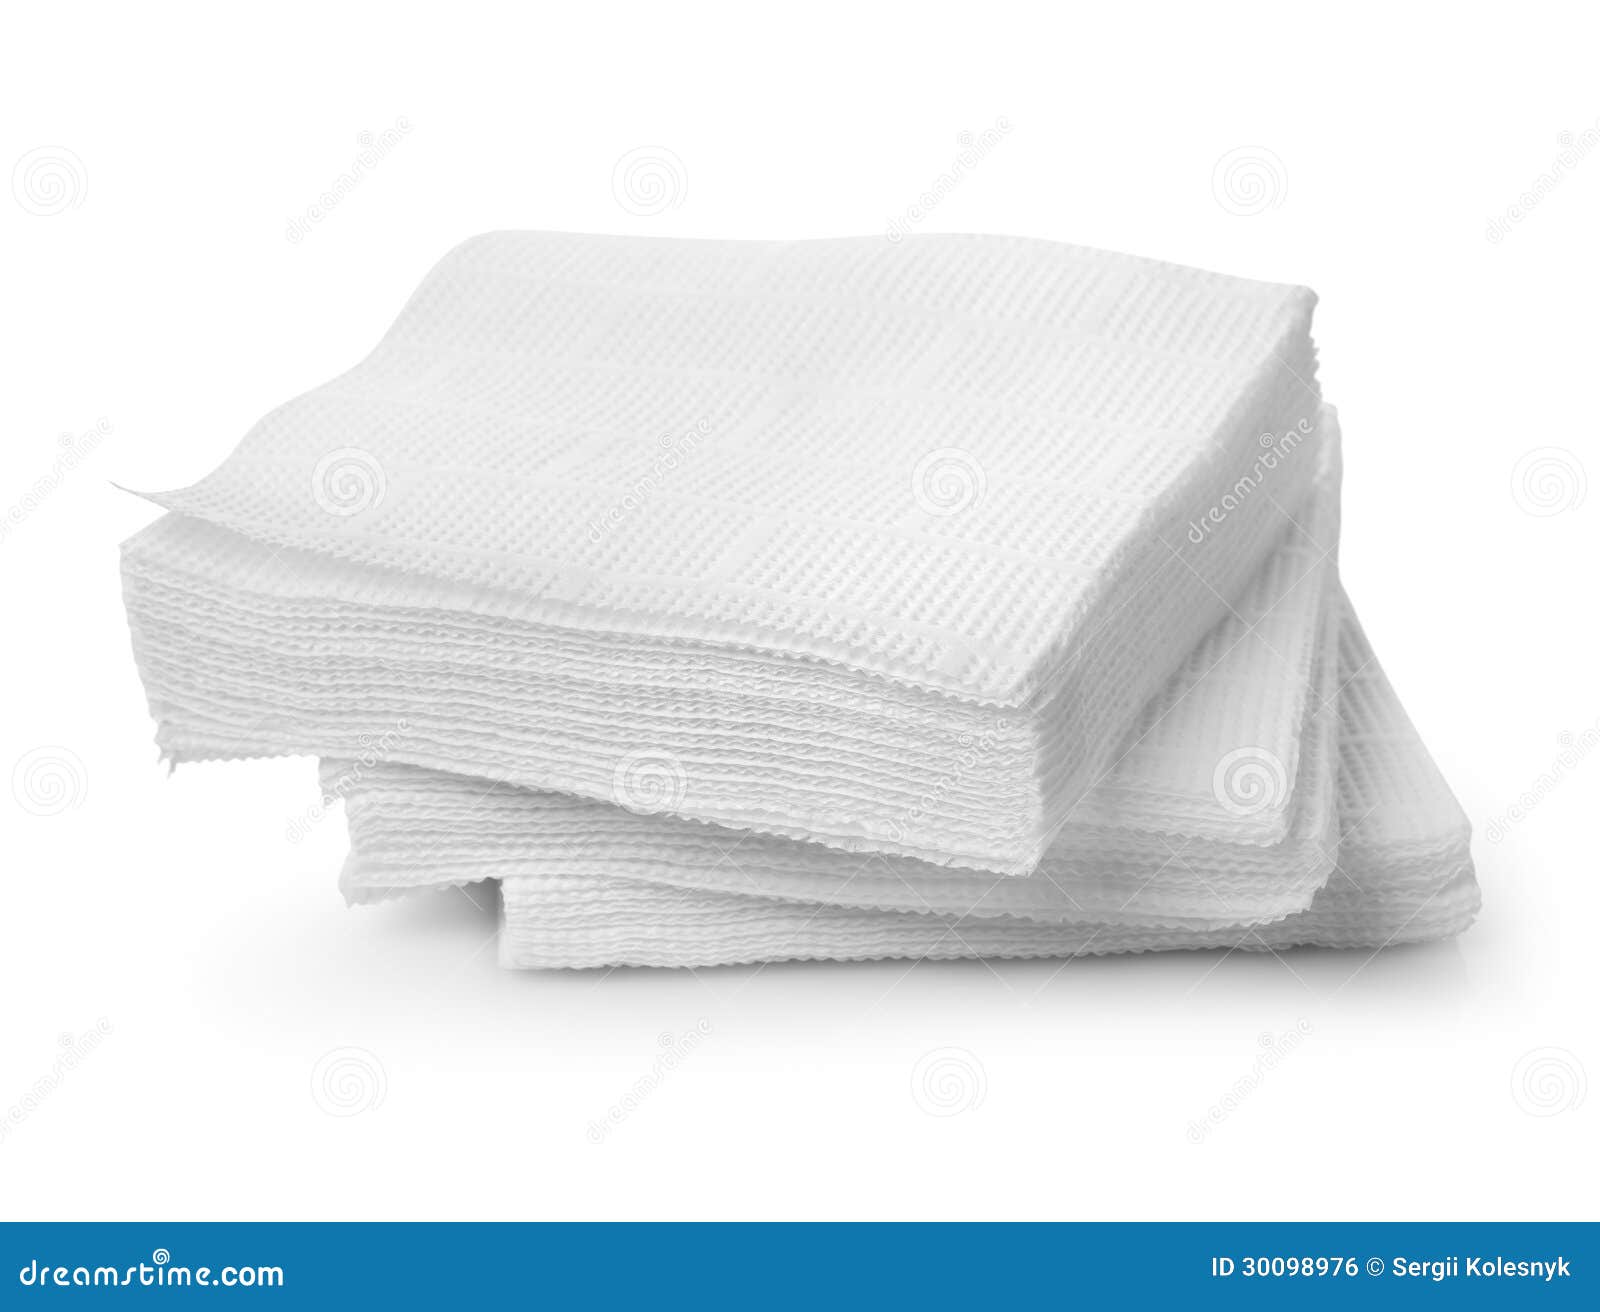 https://thumbs.dreamstime.com/z/paper-napkins-isolated-white-background-30098976.jpg